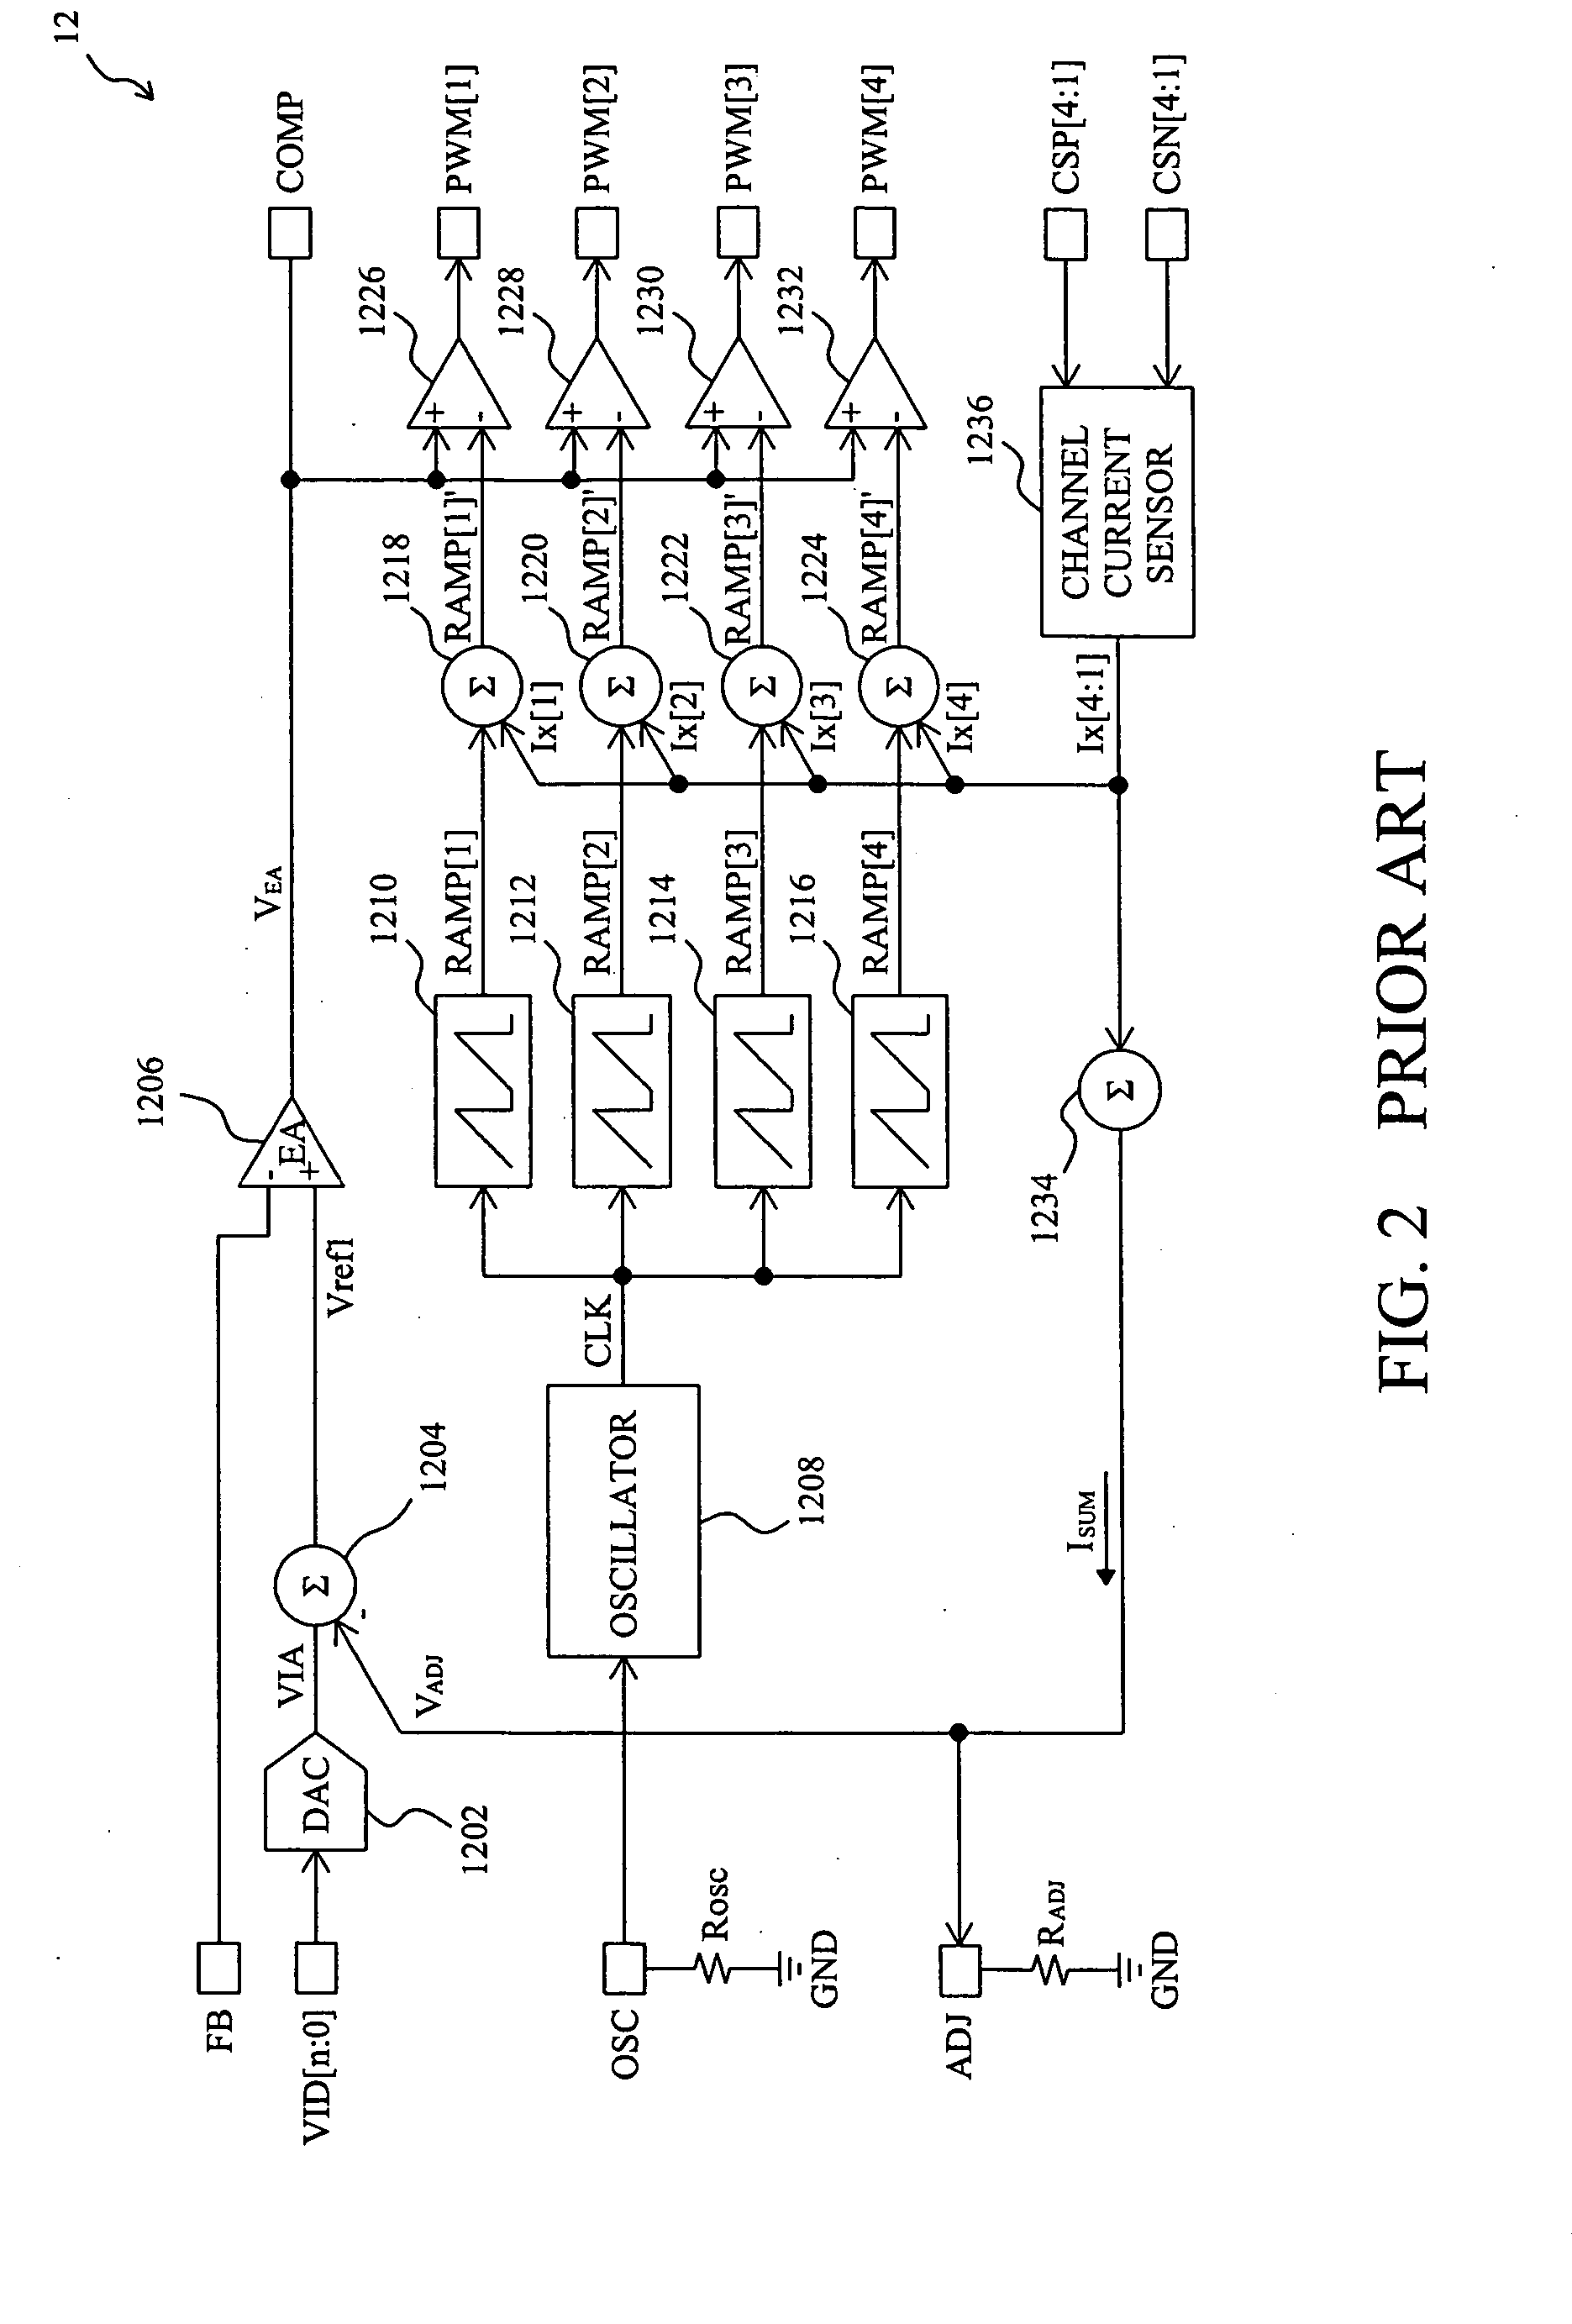 Frequency-on-the-fly control circuit and method for a DC/DC PWM converter